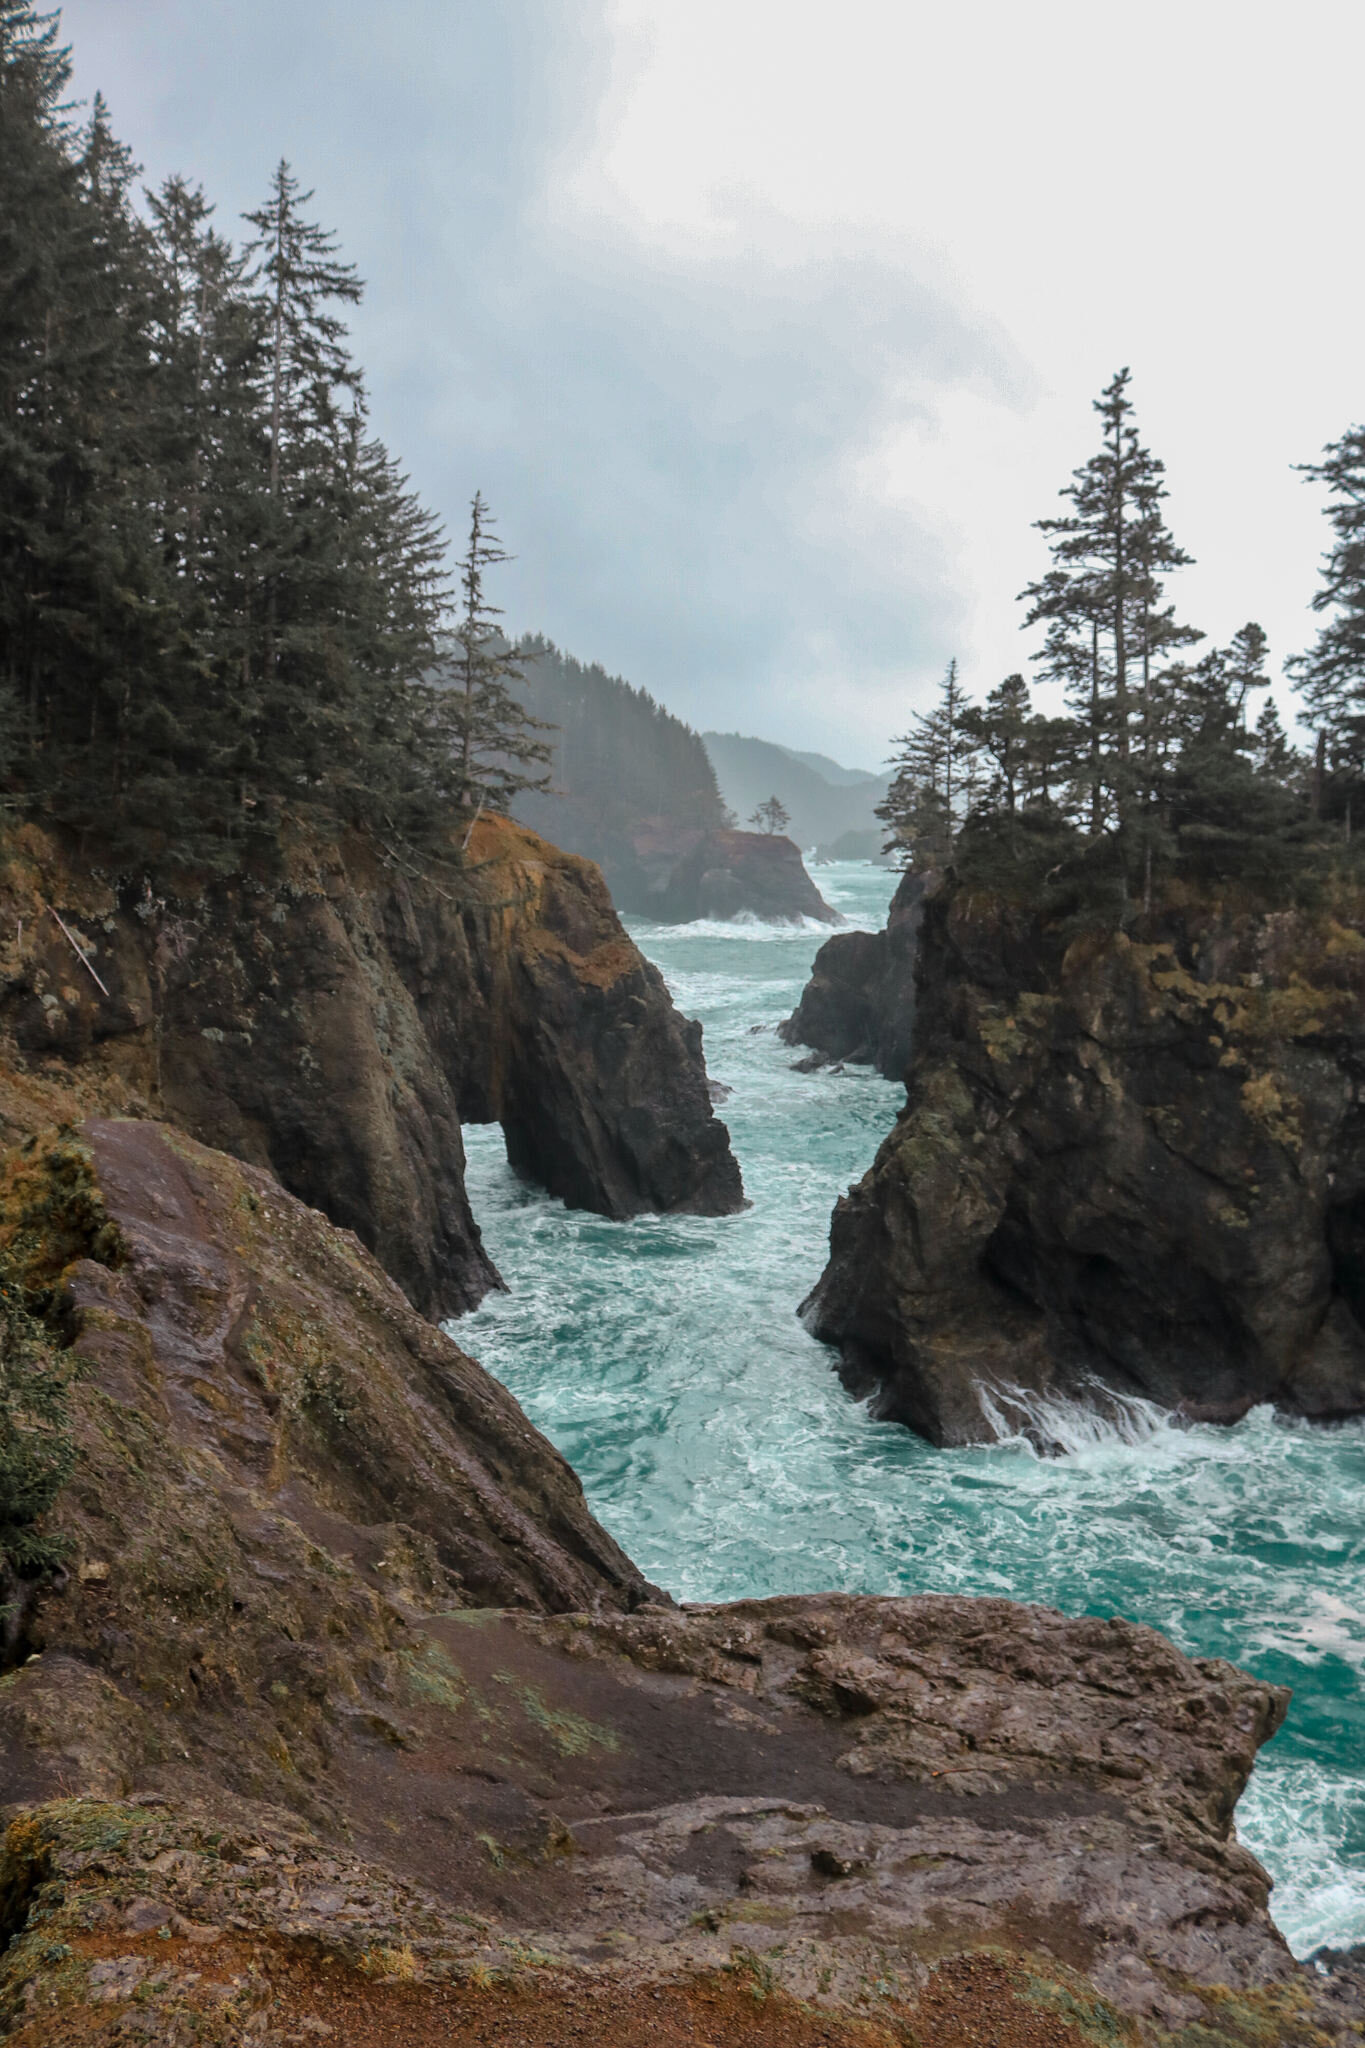 A moody scene looking along a misty coast with lots of jagged rocks and cliffs, a natural arch has formed and the ocean is a dark turquoise, Oregon Coast view Samuel H Boardman